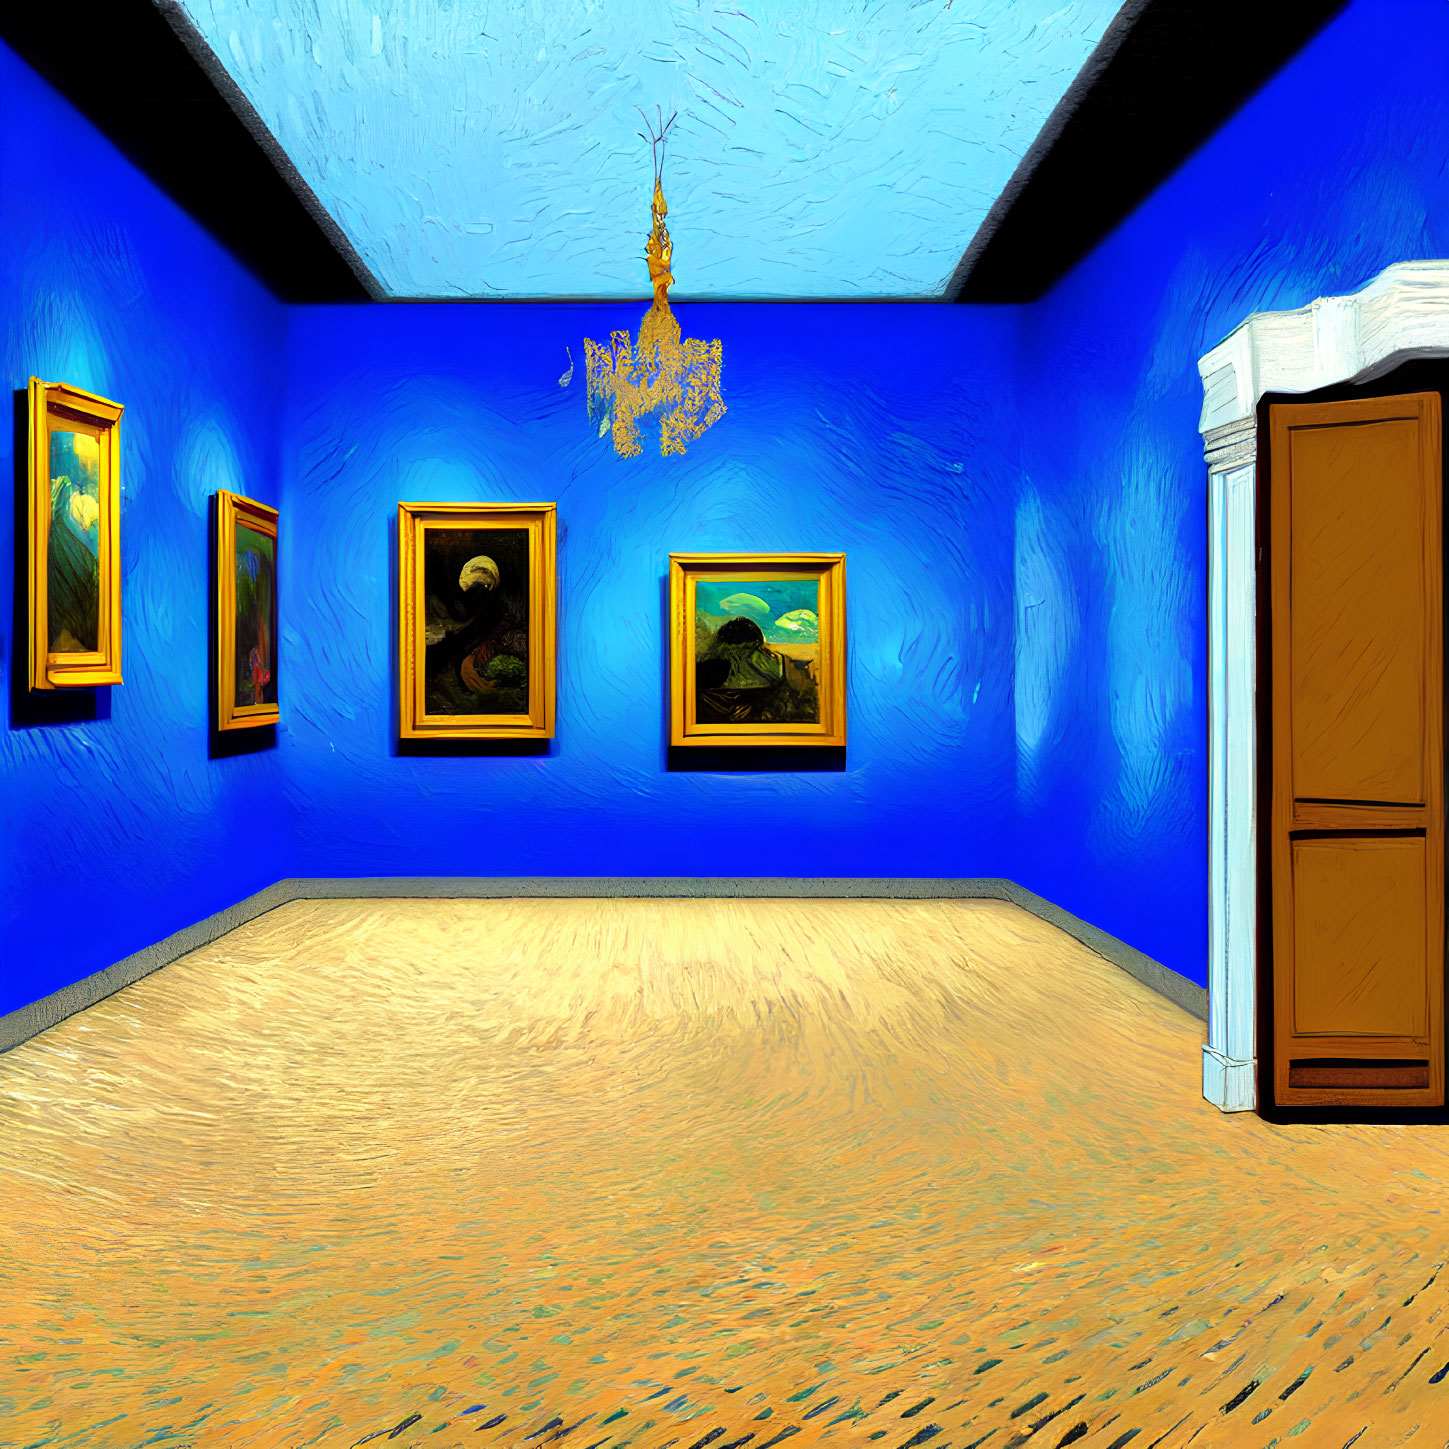 Bright Van Gogh-style art gallery painting with blue walls and golden floors